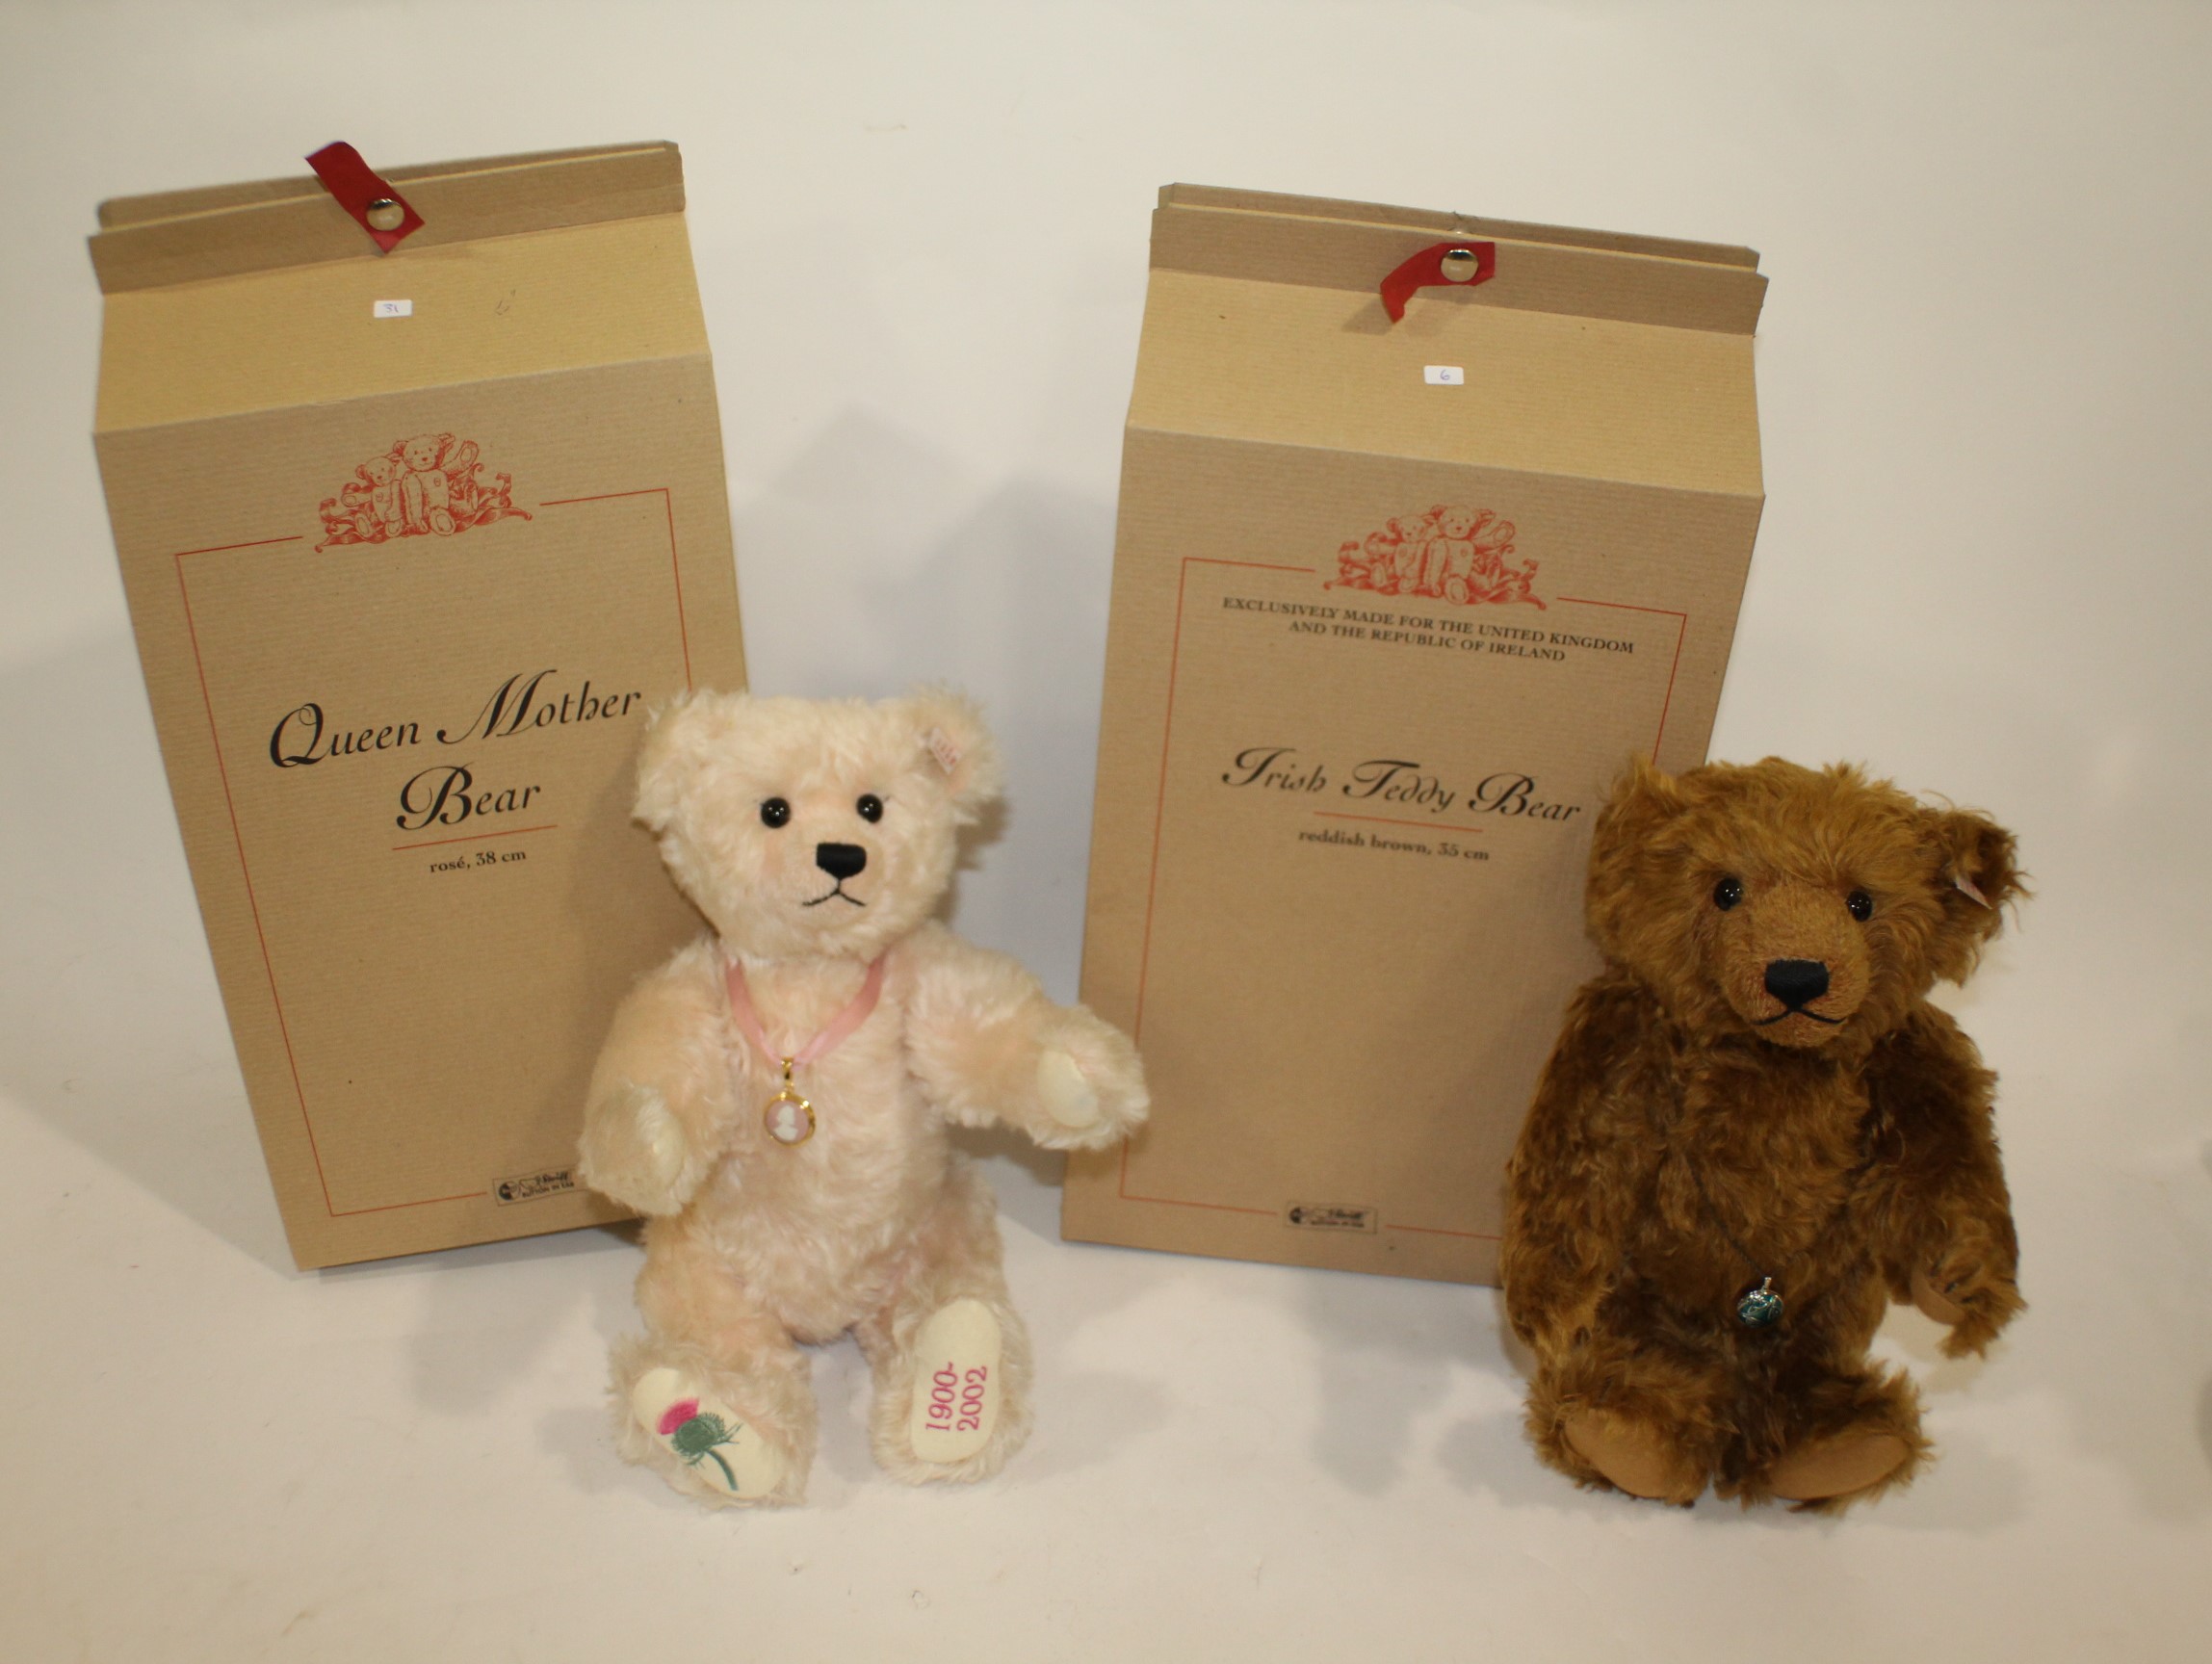 STEIFF TEDDY BEARS including Queen Mother Bear, No 1692 of 2002 made and with it's box and